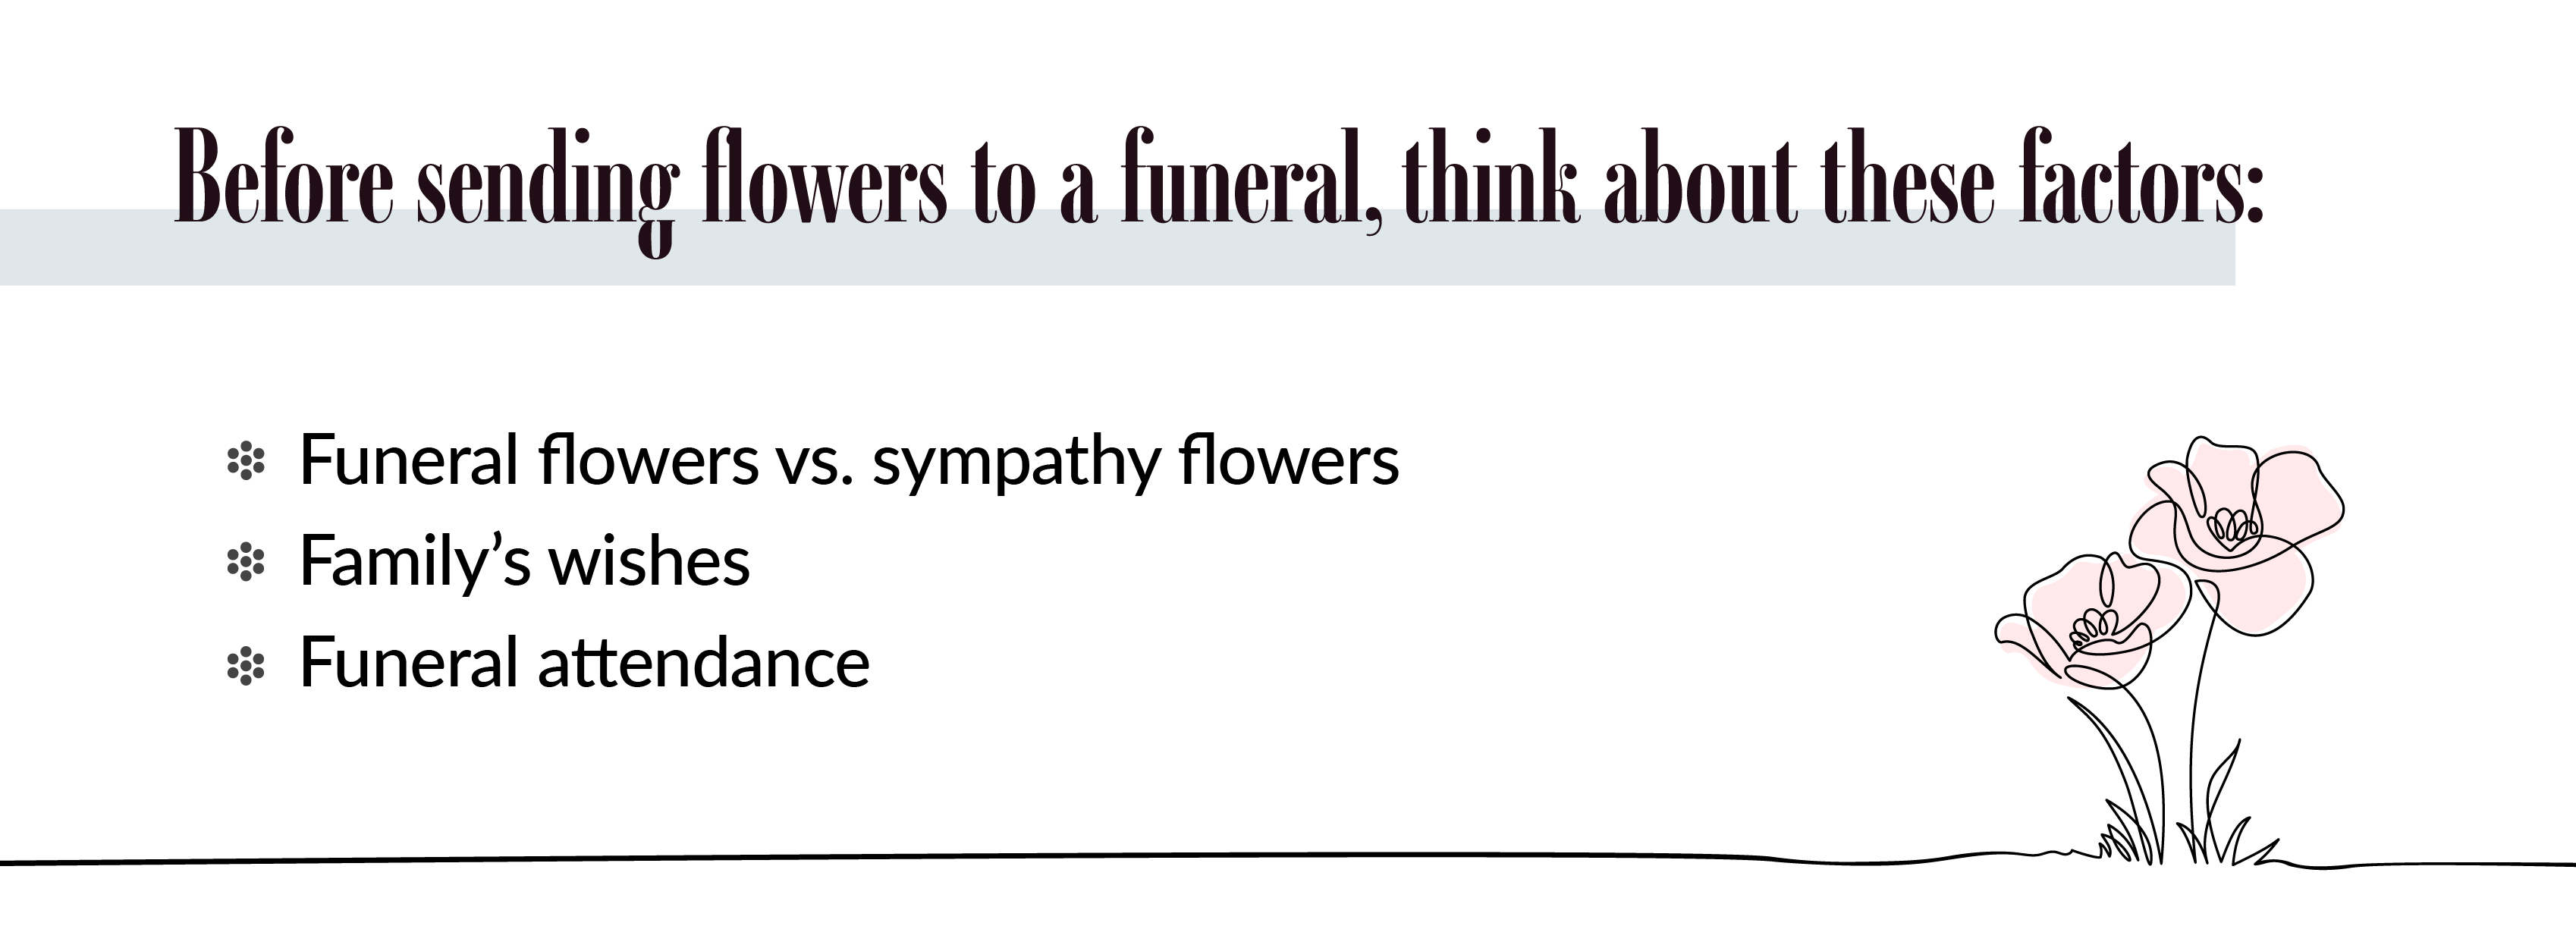 Sending flowers to a funeral thoughts